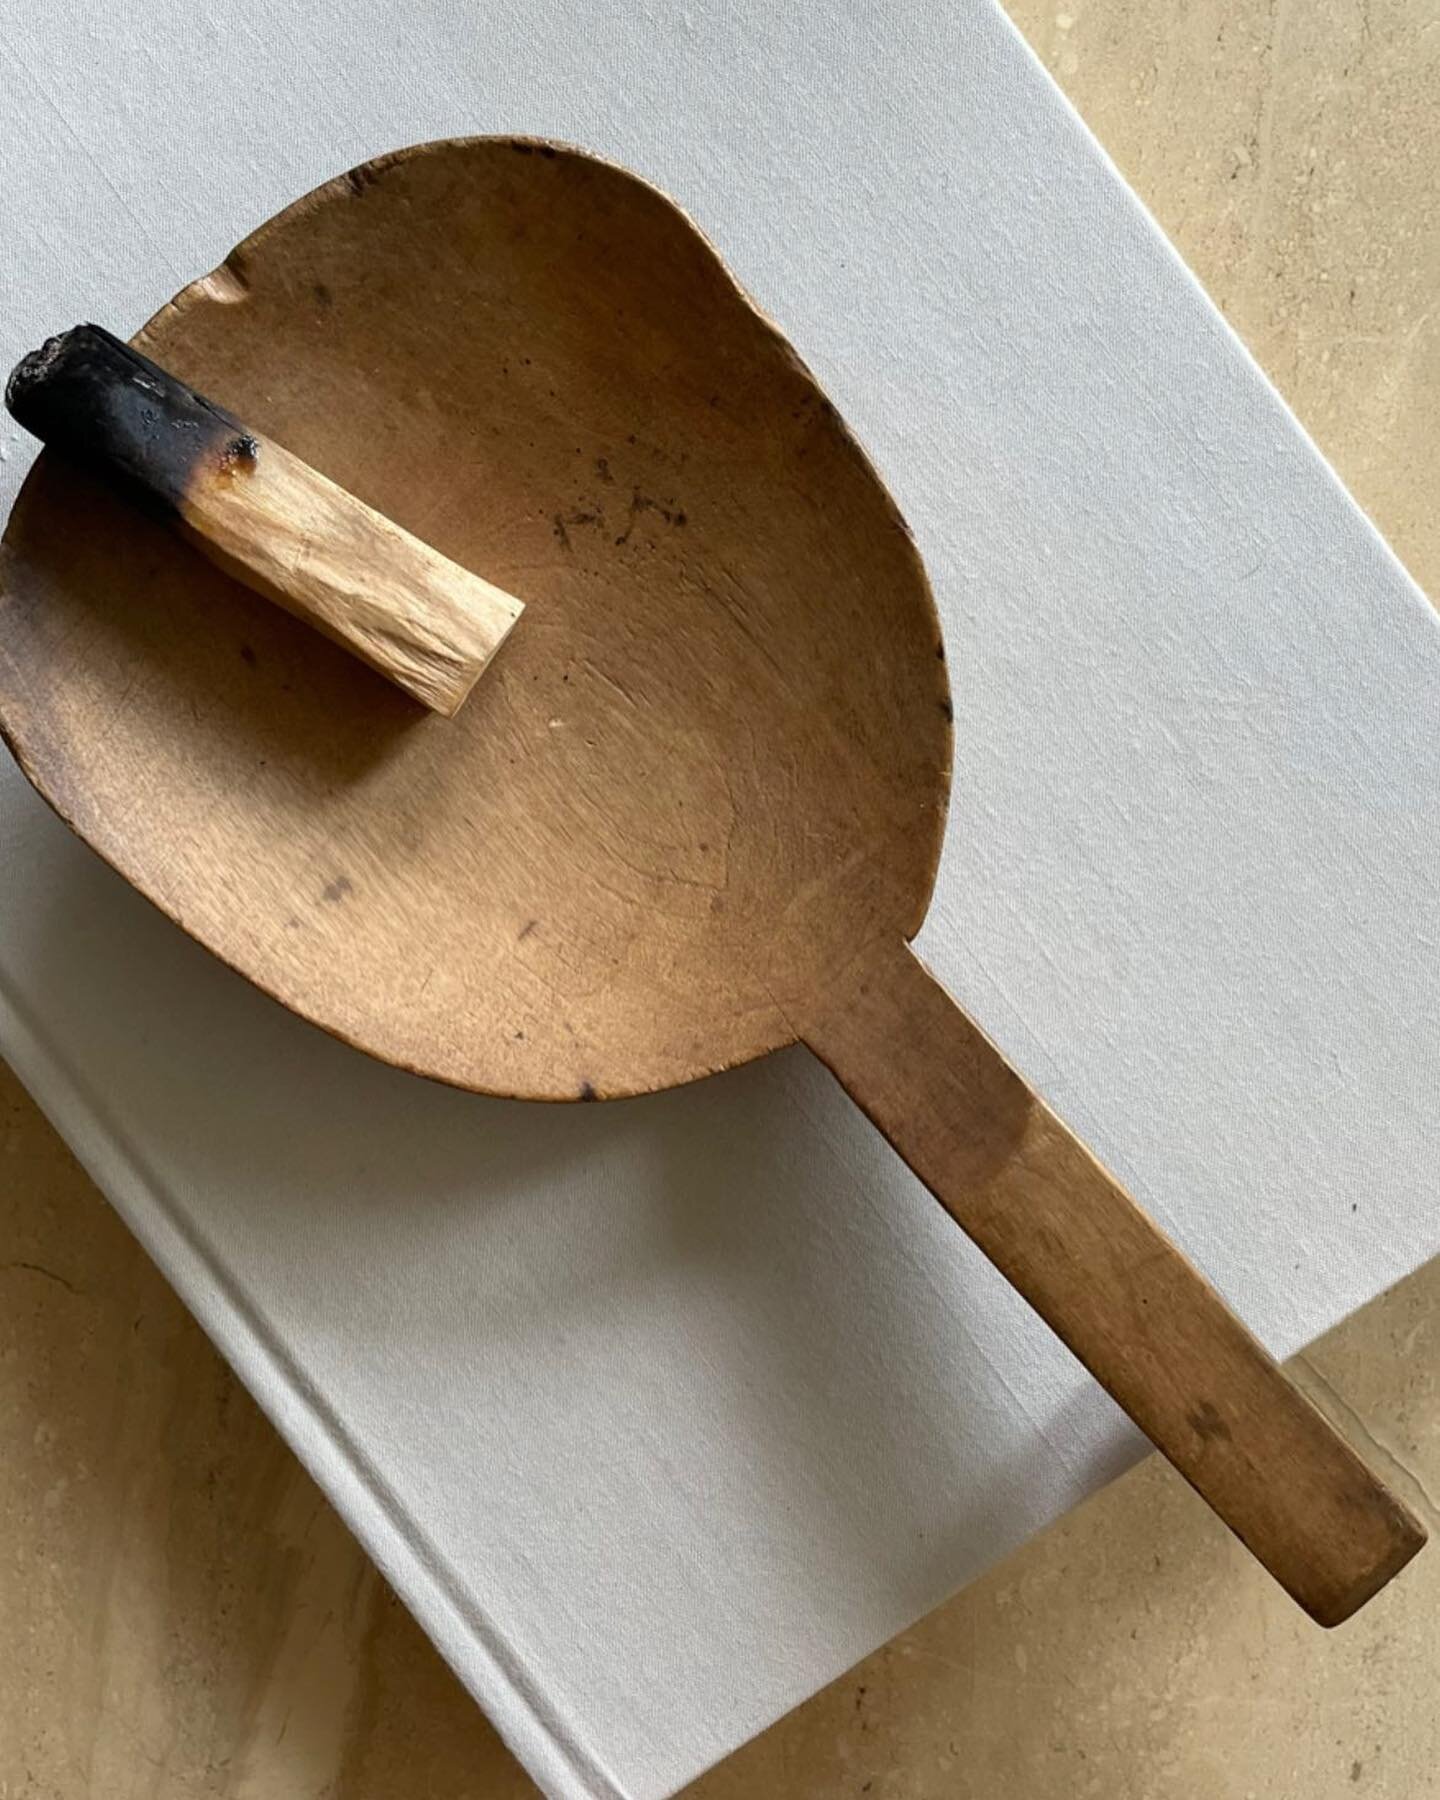 There are still some great pieces available in the abode collection including this beautiful vintage primitive paddle. It would look really cute just propped up on the kitchen counter or displayed on a shelf.